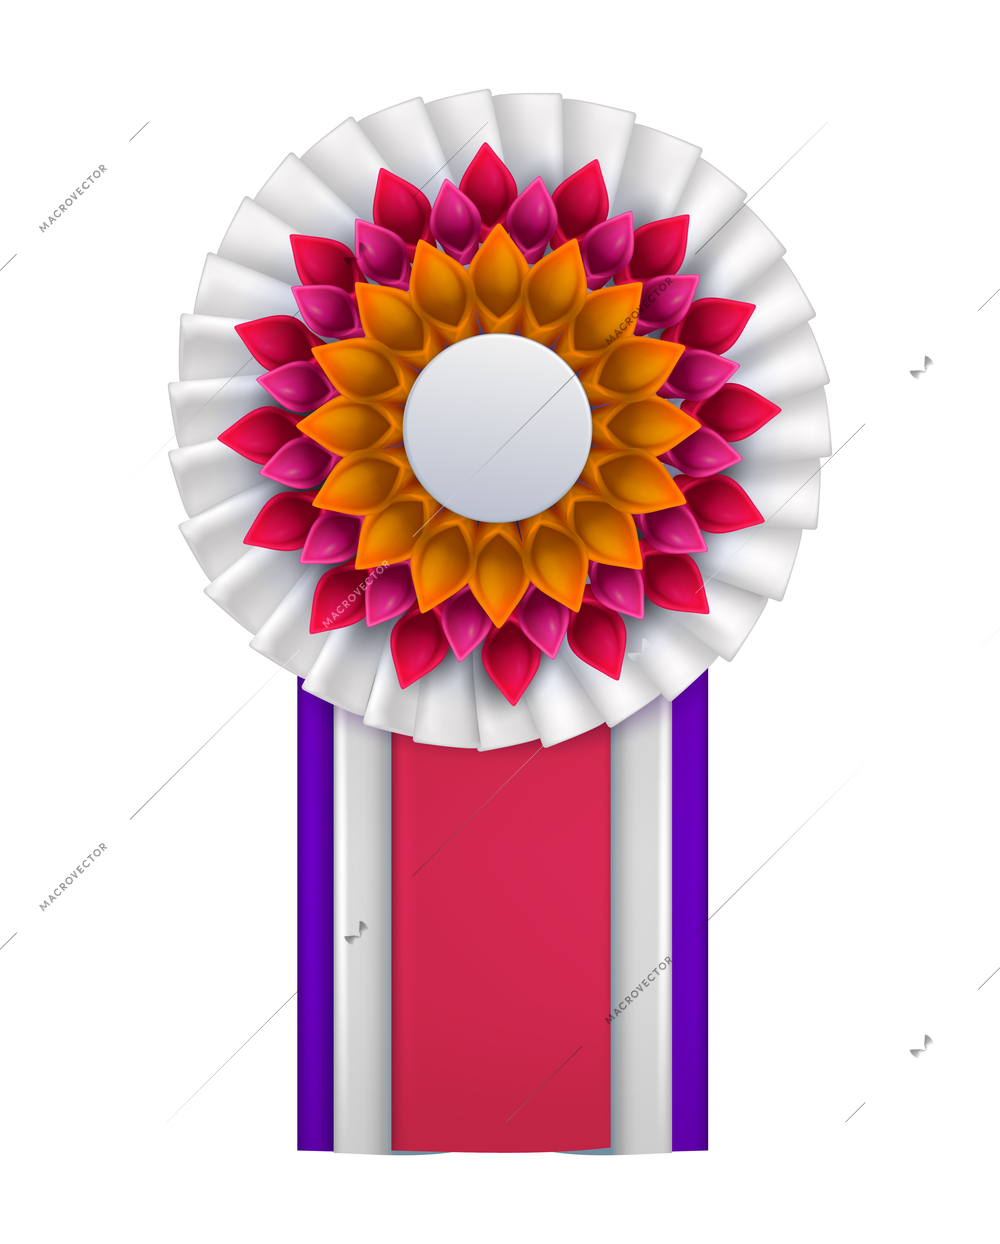 Colorful badges rosettes award realistic composition with isolated view of ornate paper badge vector illustration